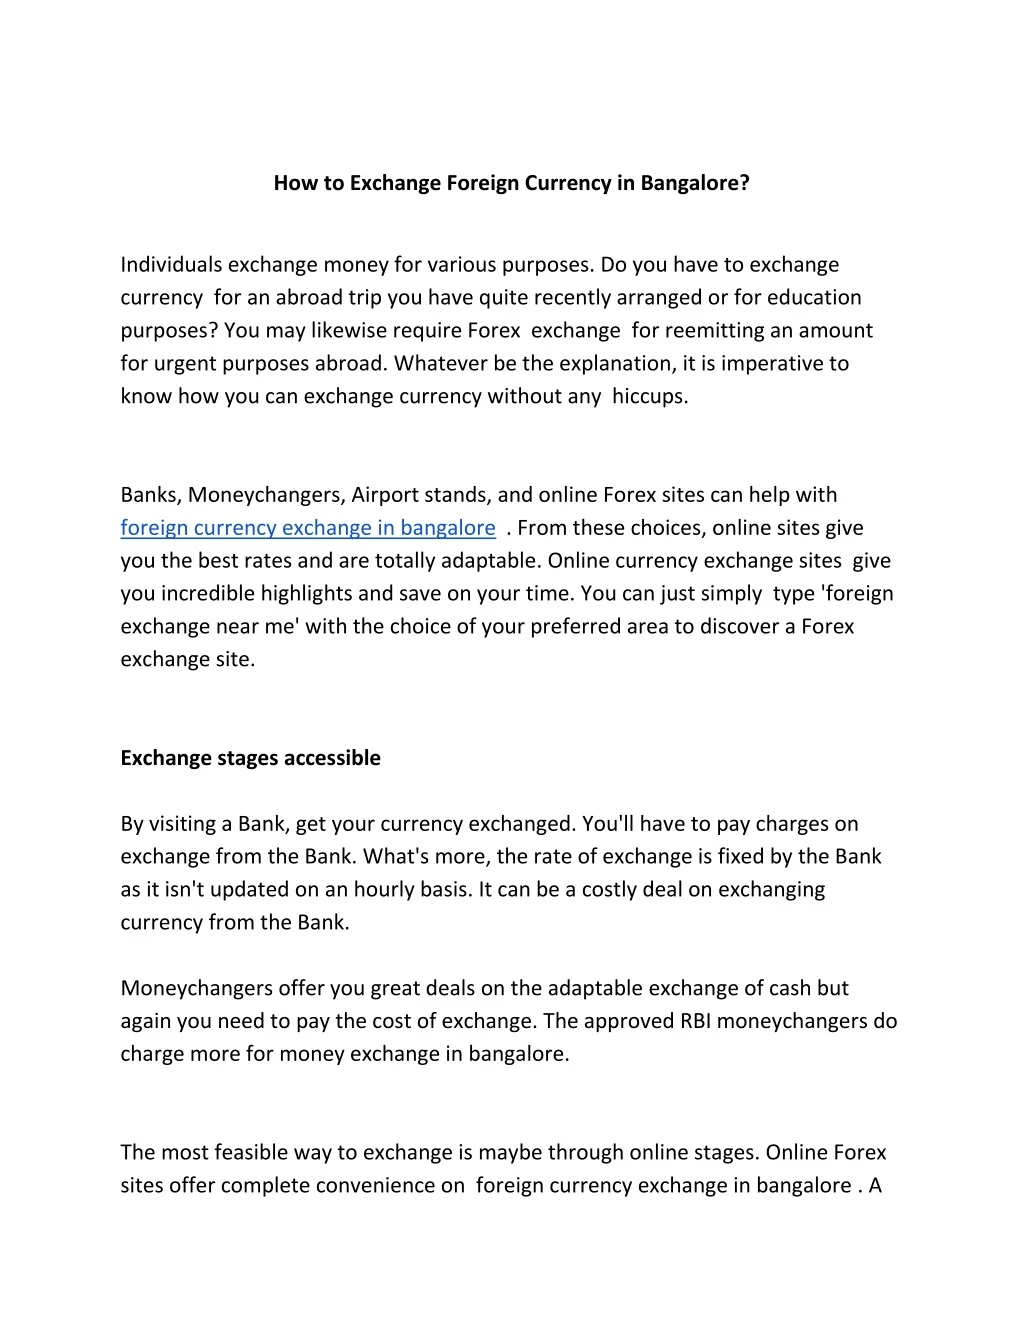 how to exchange foreign currency in bangalore